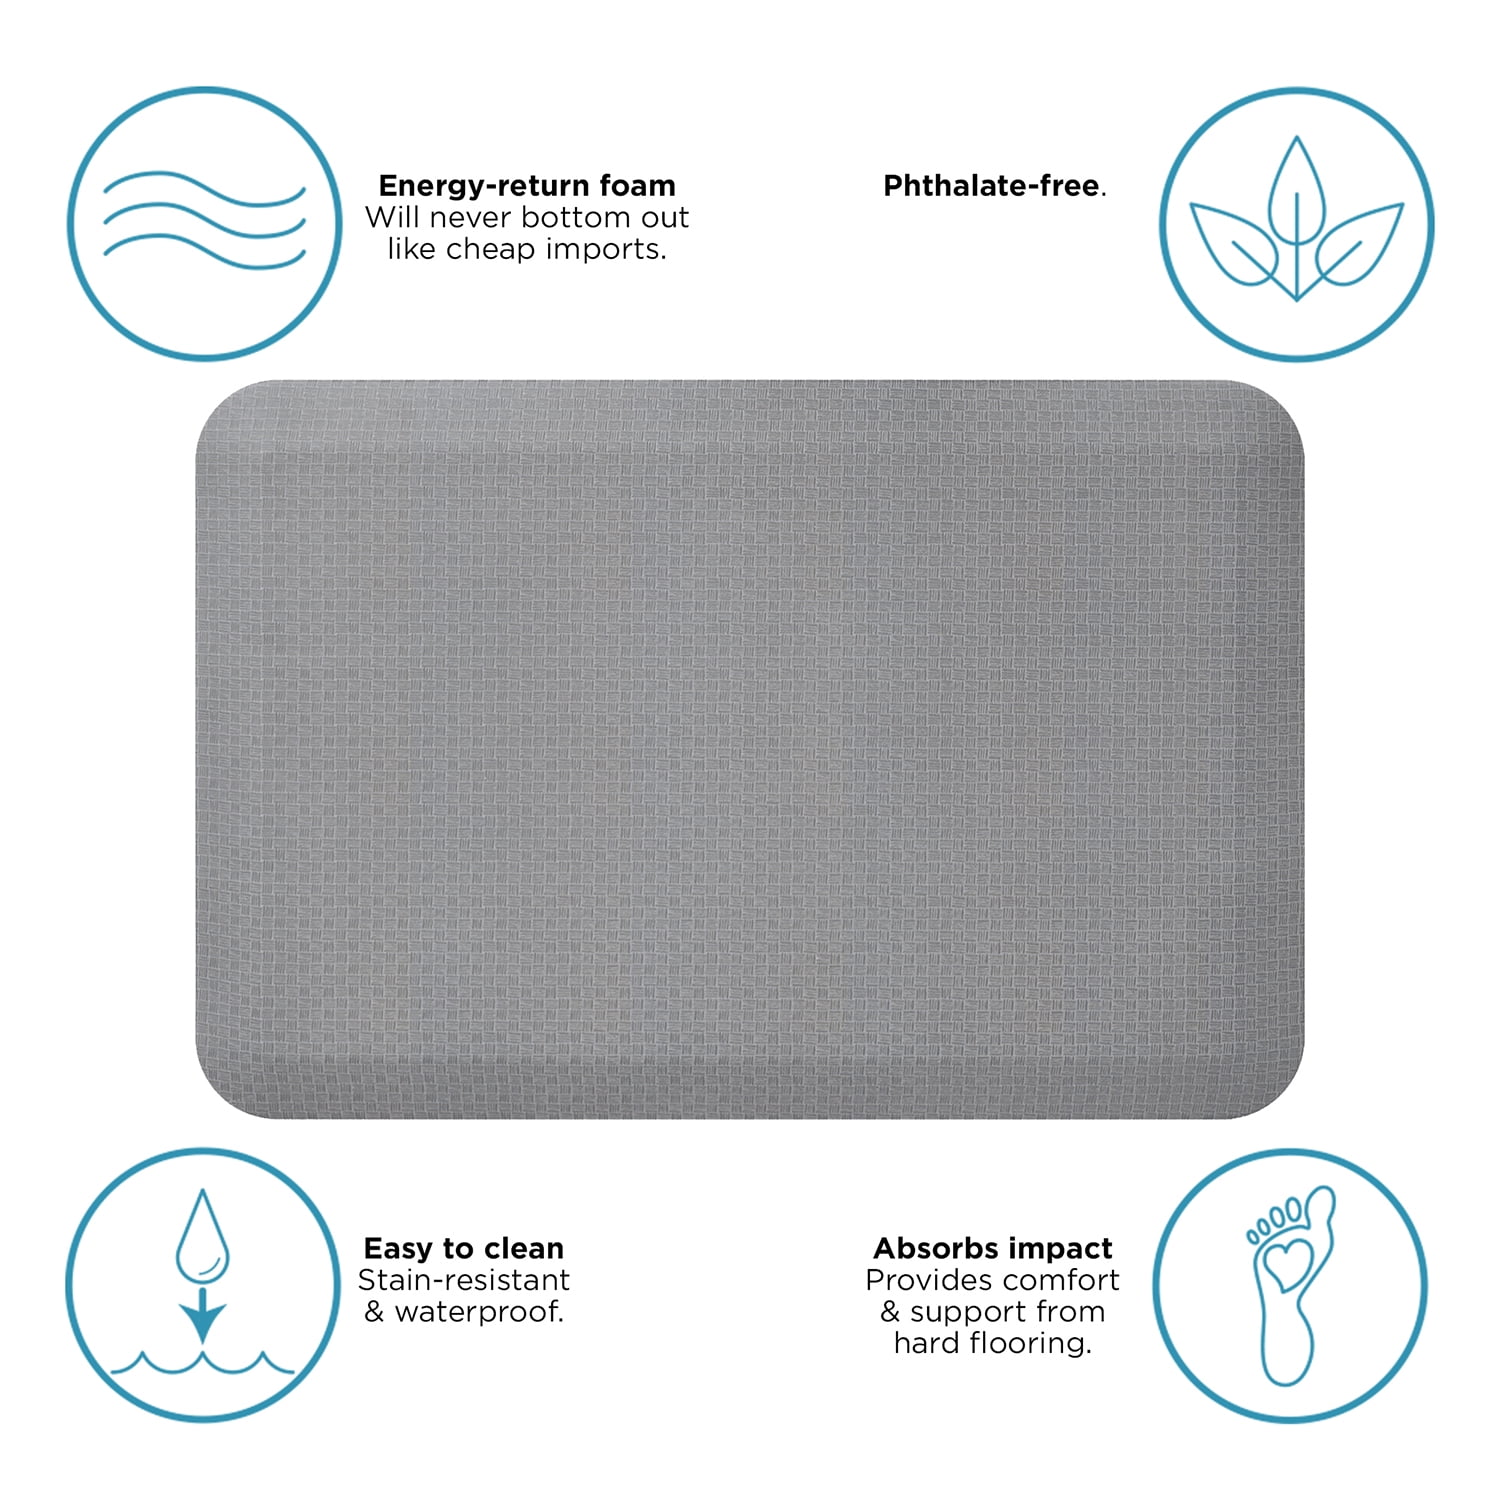 This Editor-Approved Kitchen Mat Uses Gel and Memory Foam for